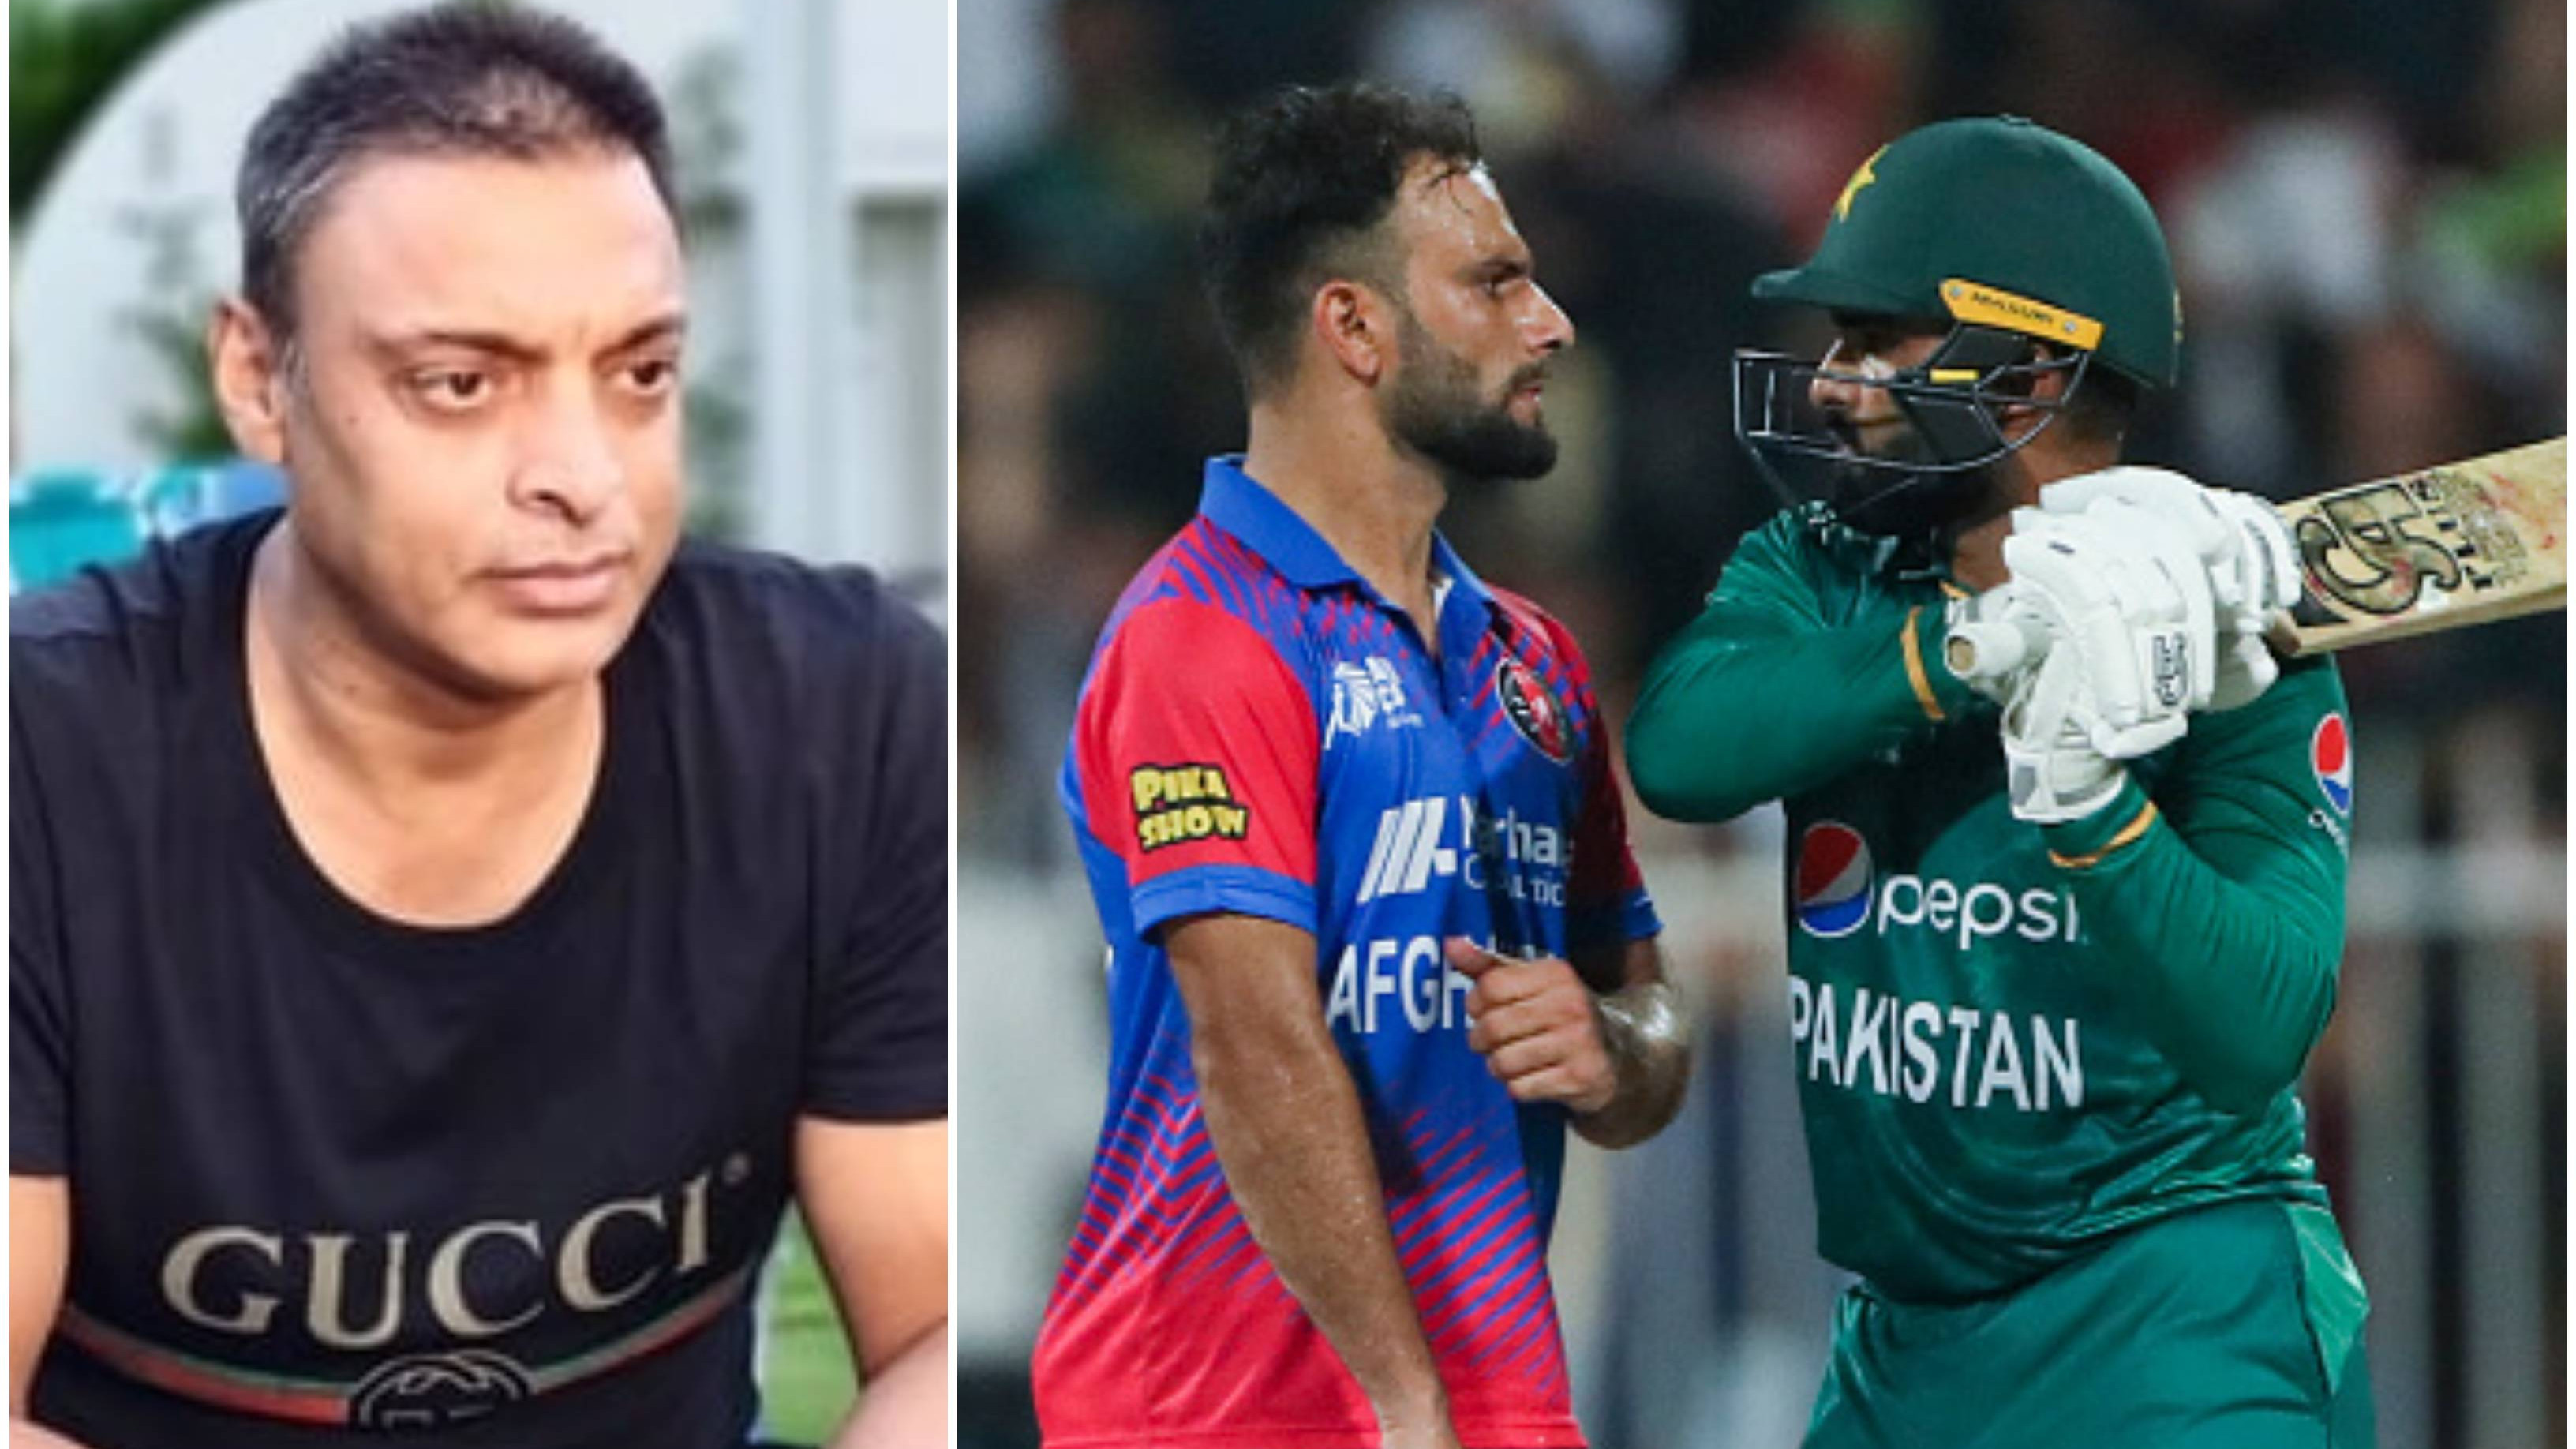 Asia Cup 2022: WATCH – “Allah ne aapko Saza di,” Shoaib Akhtar weighs in on ugly spat between Asif Ali & Fareed Ahmed